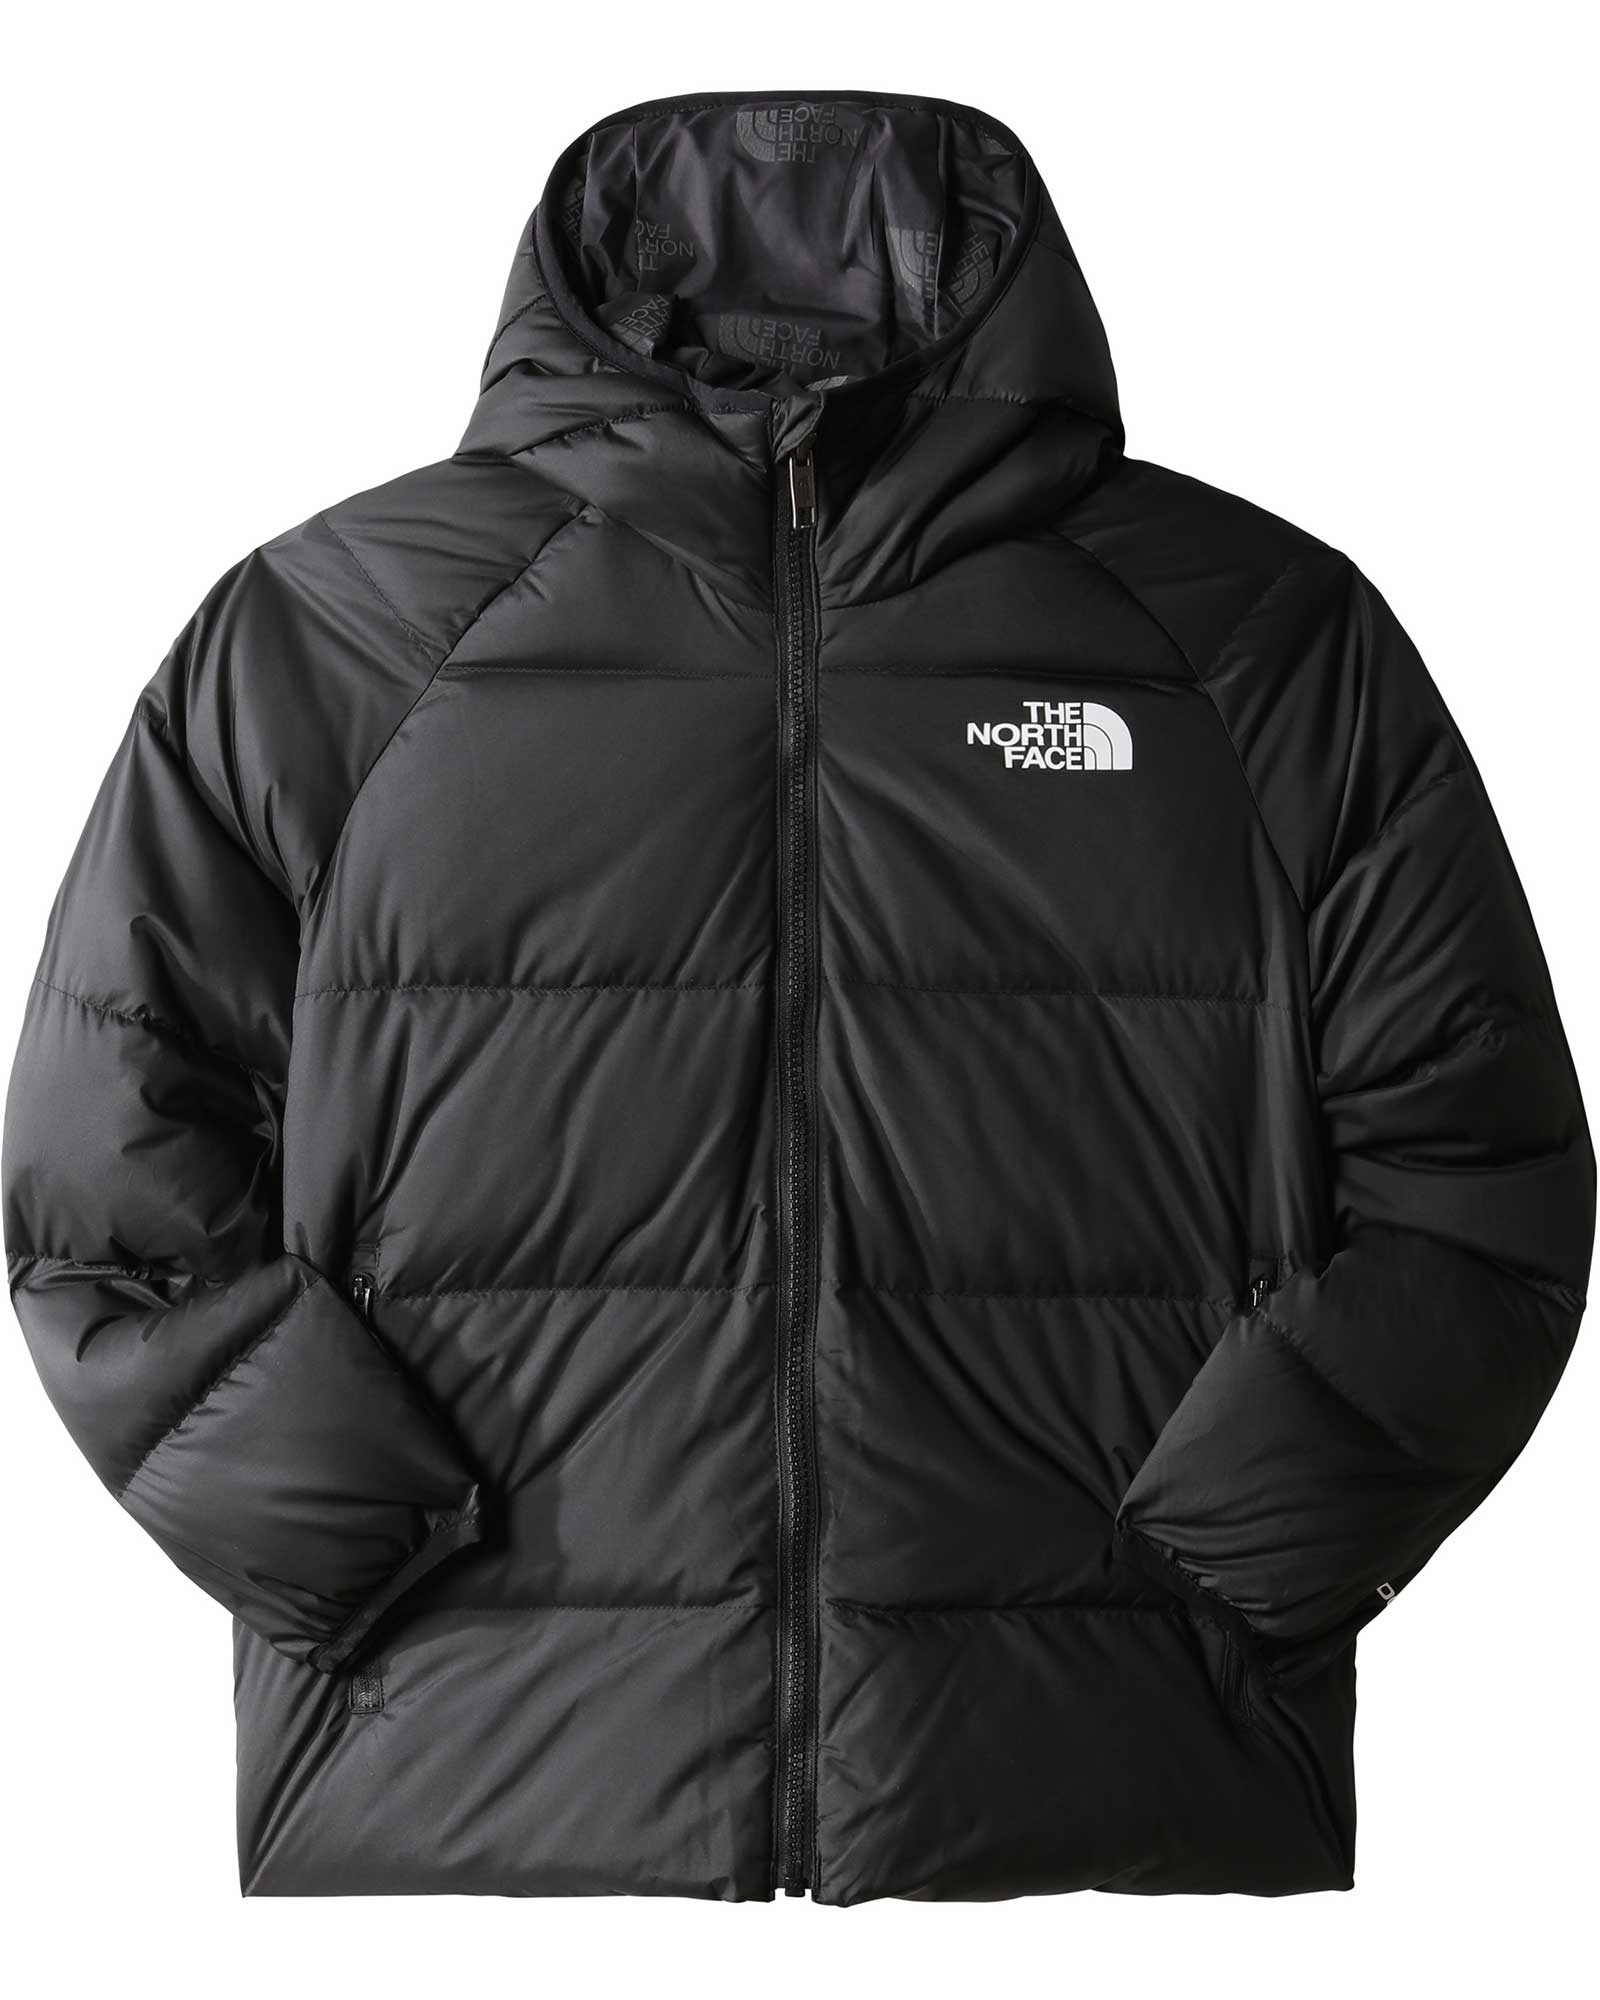 The North Face Print North Kids’ Down Hooded Jacket - TNF Black L